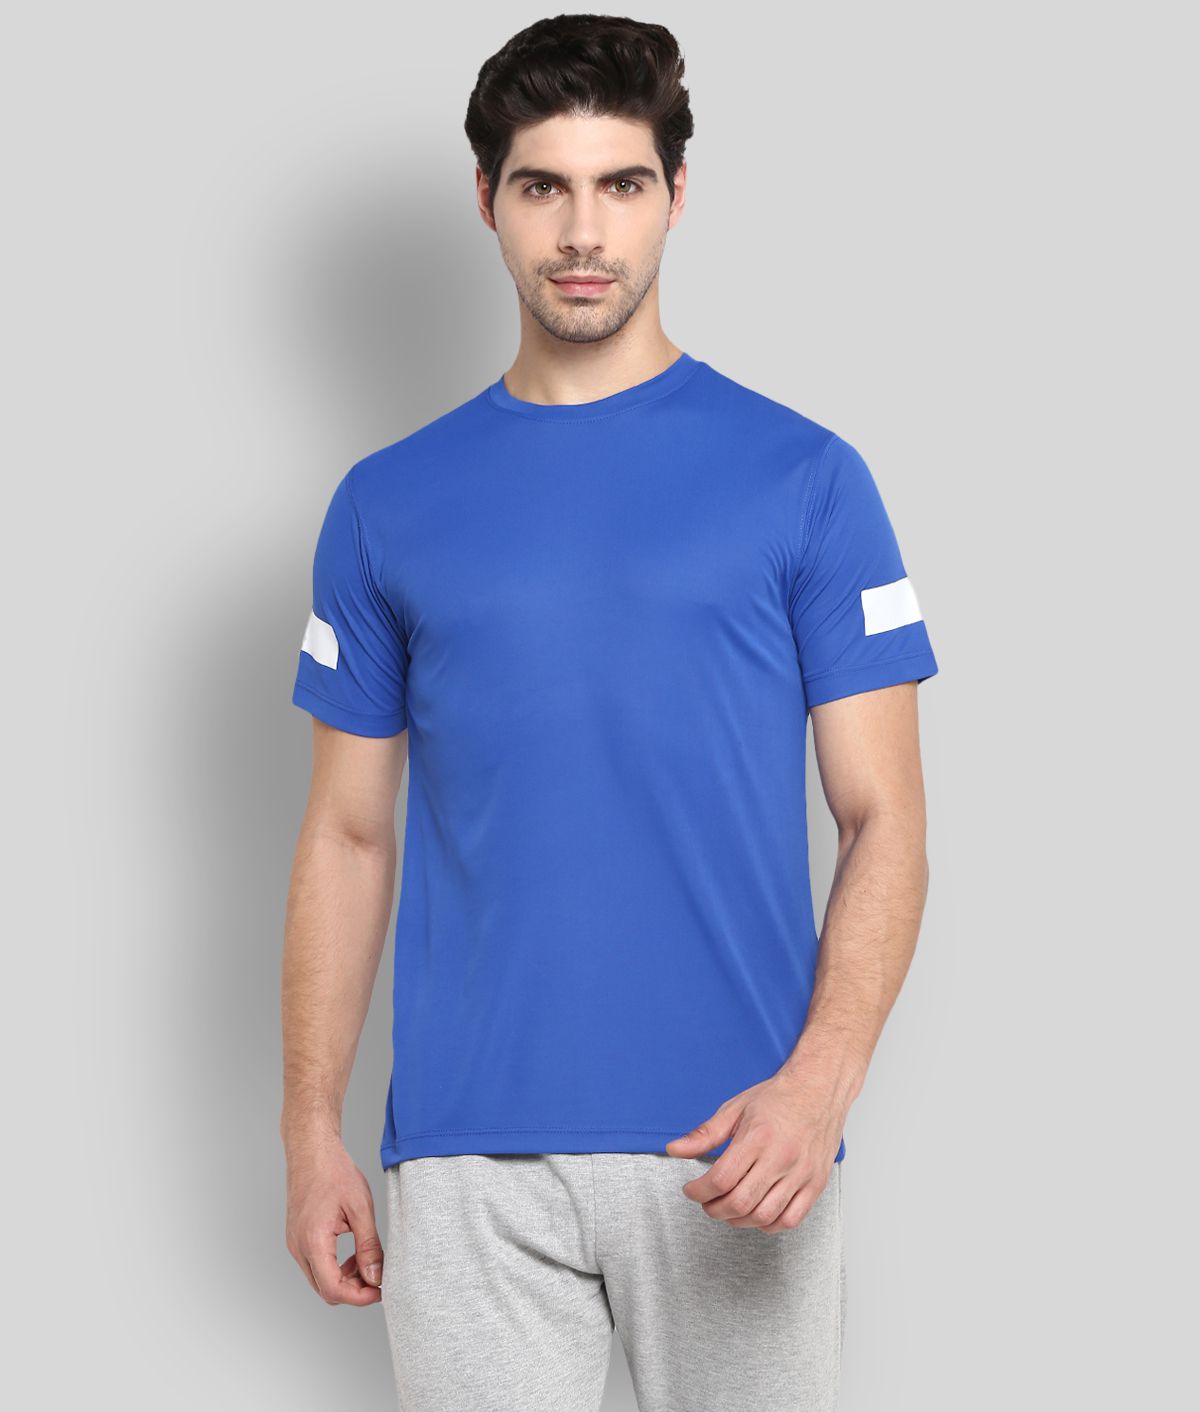     			OFF LIMITS - Blue Polyester Regular Fit Men's Sports T-Shirt ( Pack of 1 )